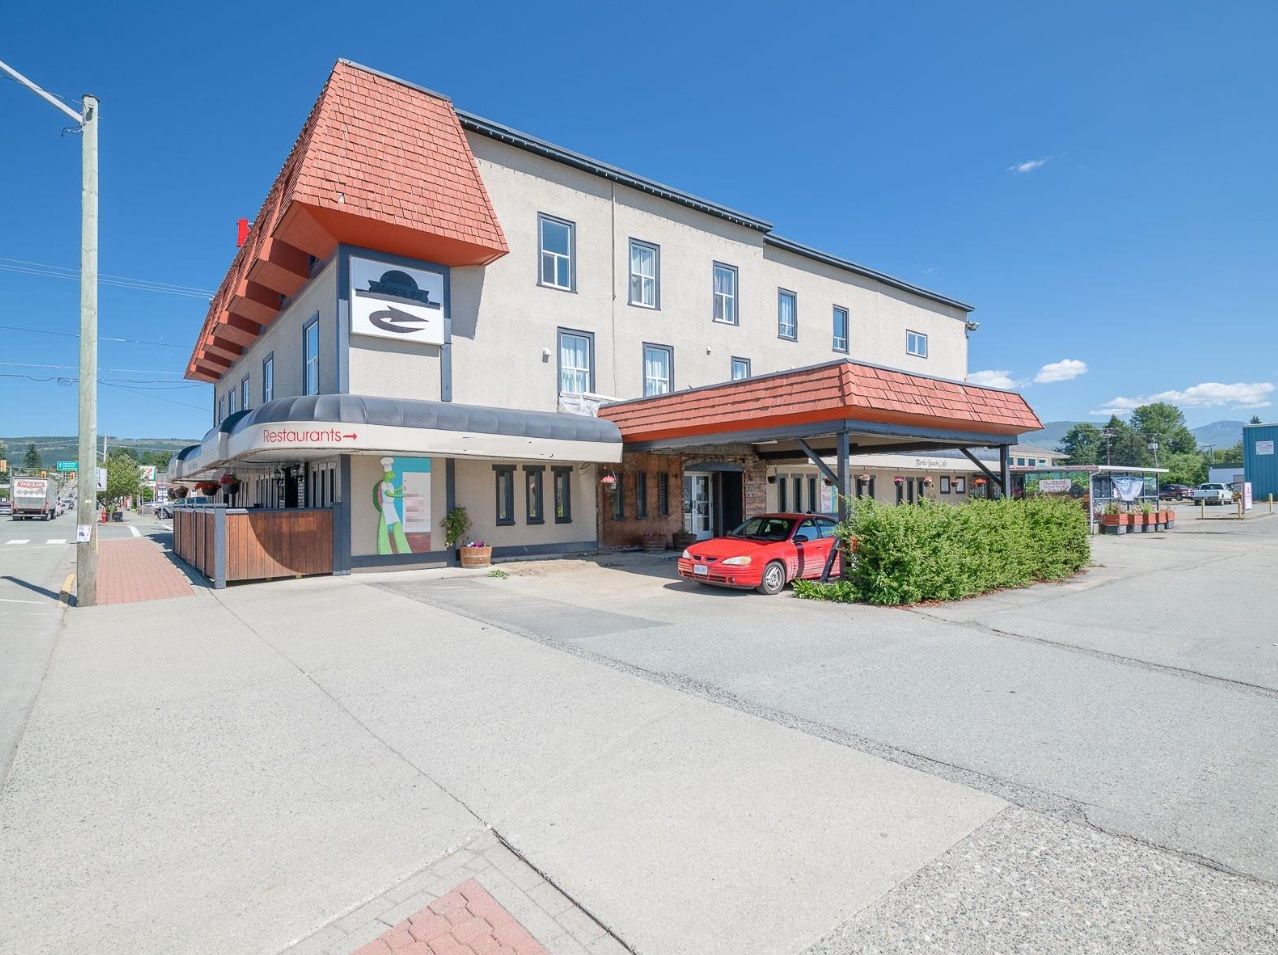 inn for sale bc, hotel motel for sale bc, bc hotel motel for sale, hotel for sale bc, motel for sale bc